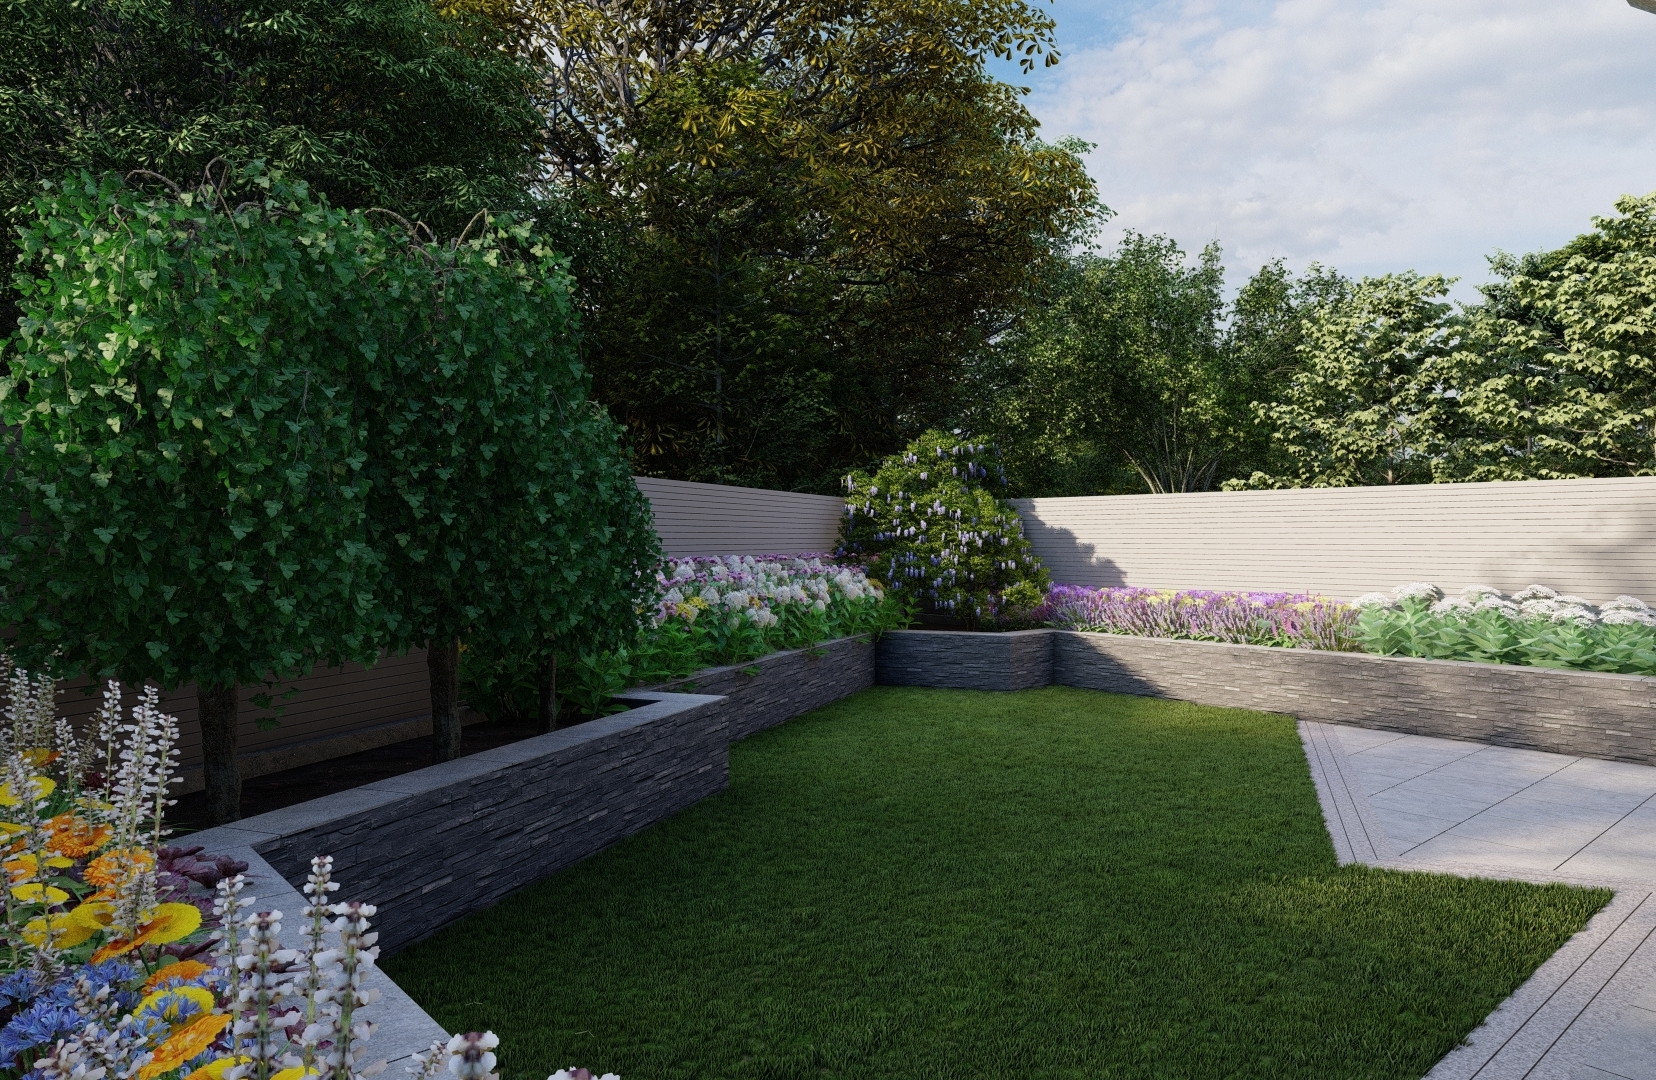 Design Visuals for a lush, low maintenance featuring easy to access Raised Planter Beds, custom made Horizontal Slatted Timber Fencing, Limestone paving etc for a Family Garden in Drumcondra, Dublin 9.